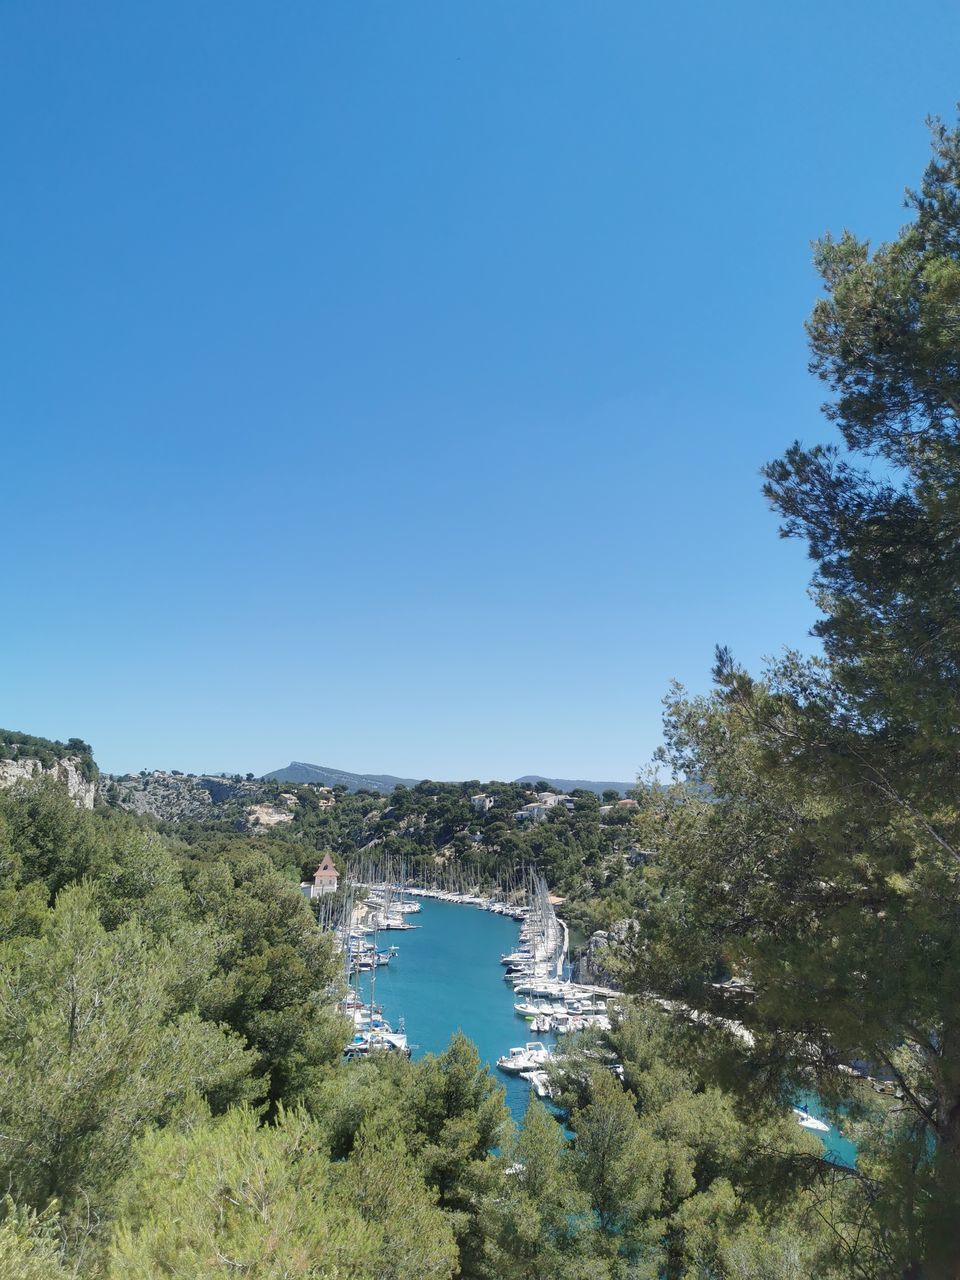 PANORAMIC SHOT OF SEA AGAINST CLEAR BLUE SKY